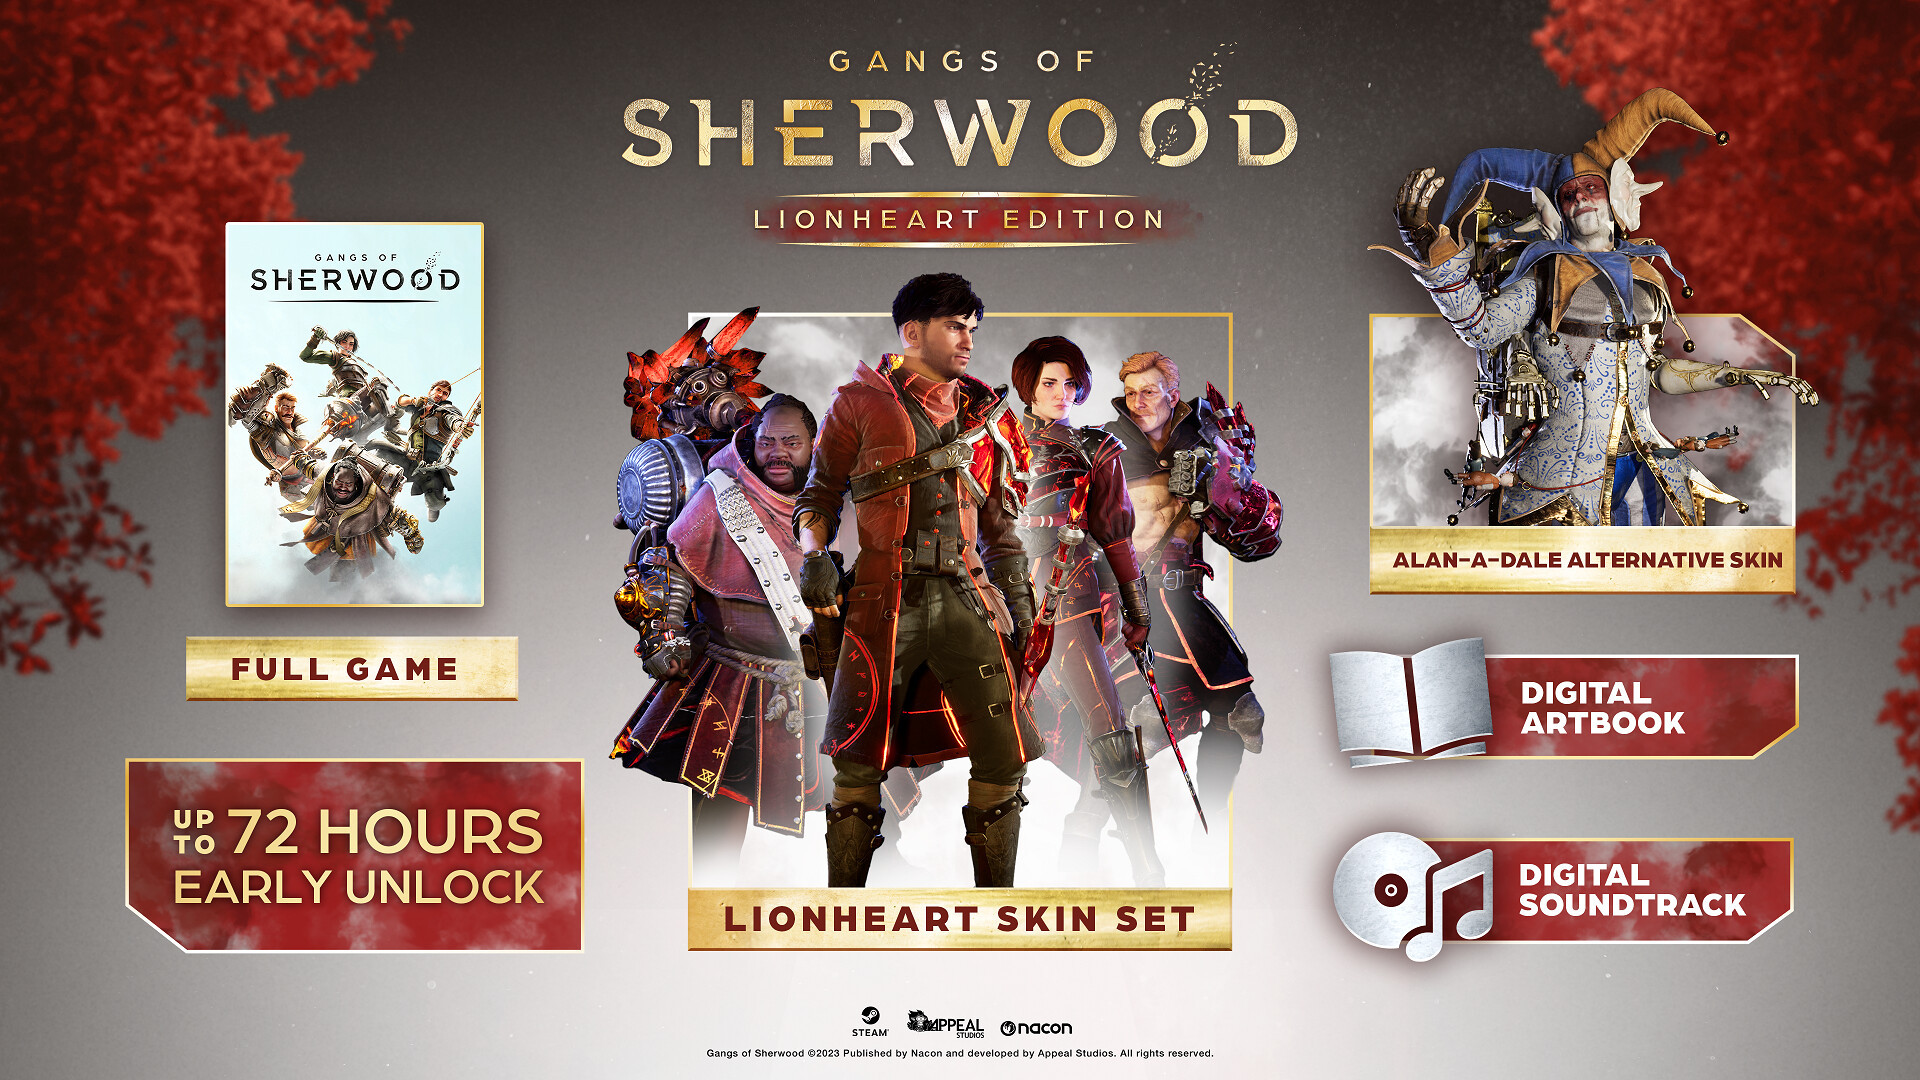 Robin Hood Goes Steampunk in Gang of Sherwood Review - Game News 24